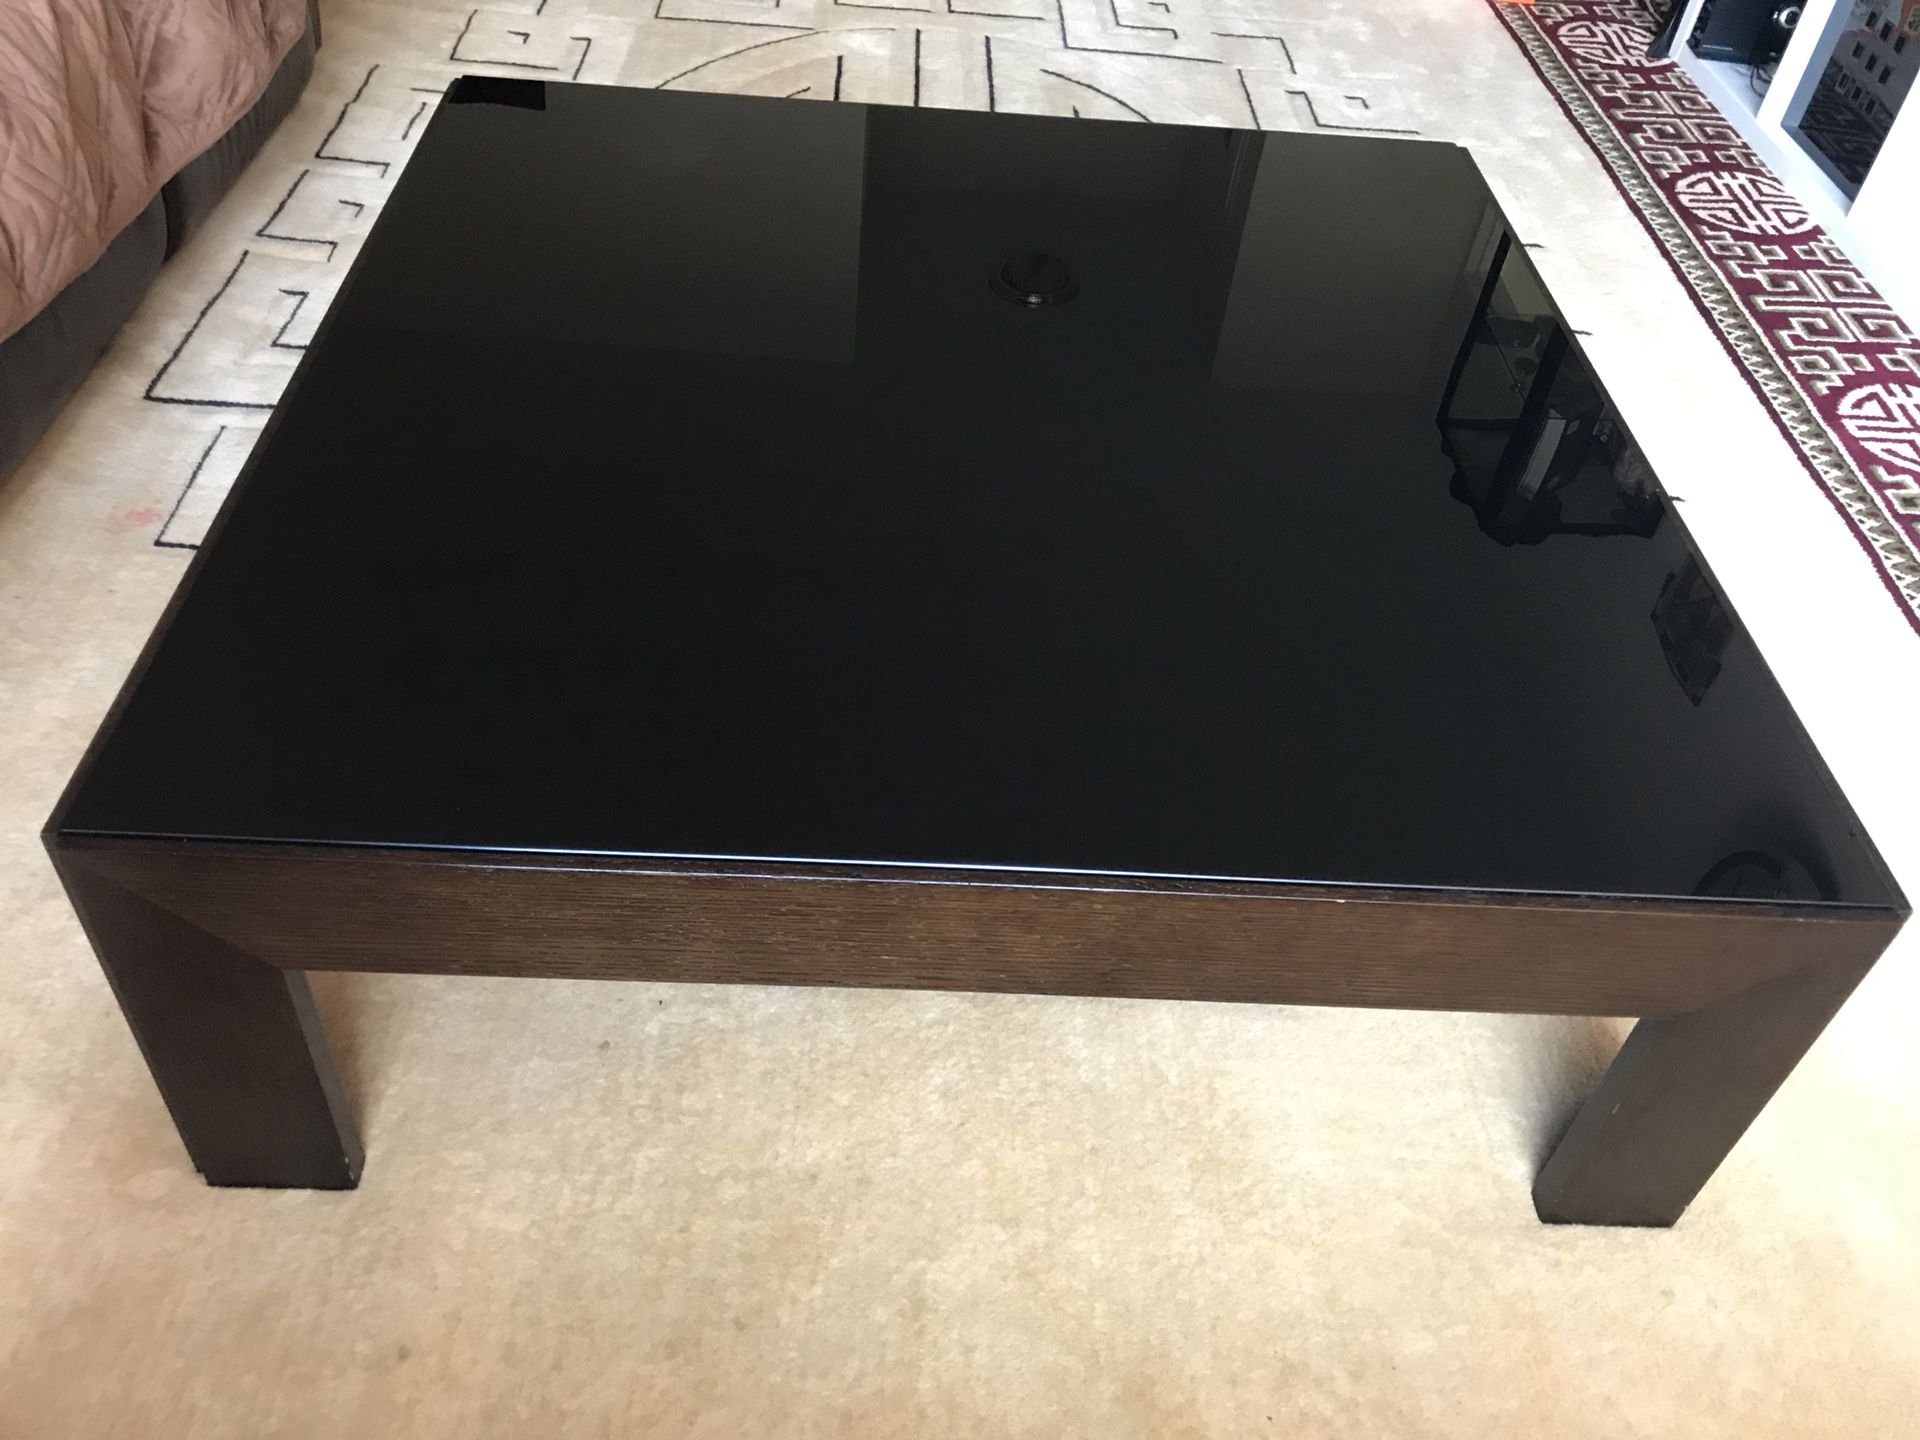 Coffe table $200